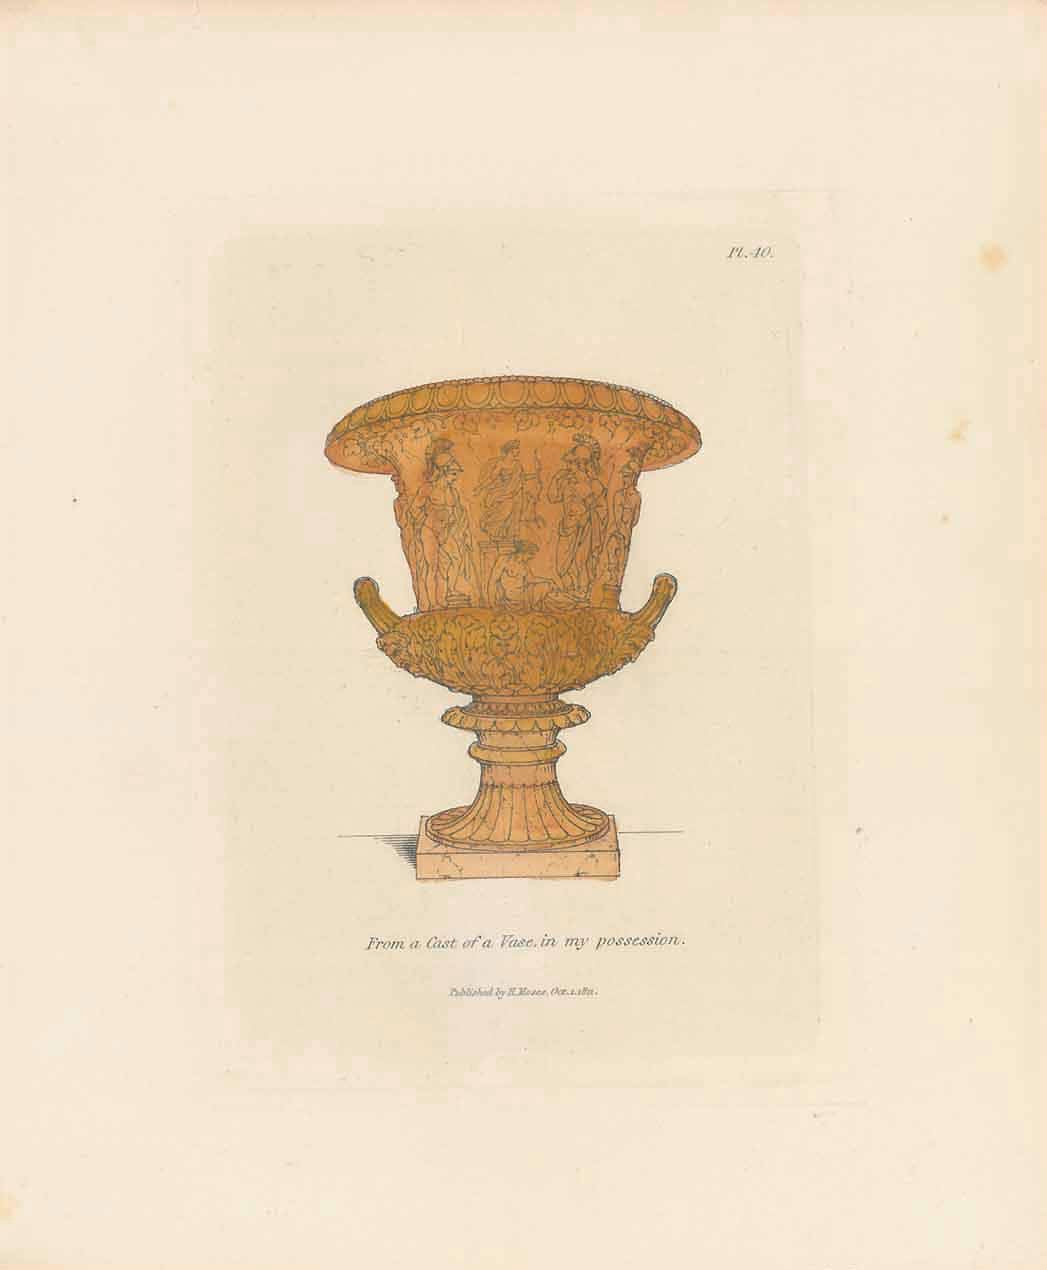 Plate 40 - Hand-colored copper etching  "From a Cast of a Vase in my possession"  Published in "Select Greek and Roman Antiquities from Vases, Gems and other Objects of the Choicest Workmanship"  By Henry Moses (1781-1870)  London, 1811  Original antique print , interior design, wall decoration, ideas, idea, gift ideas, present, vintage, charming, special, decoration, home interior, living room design